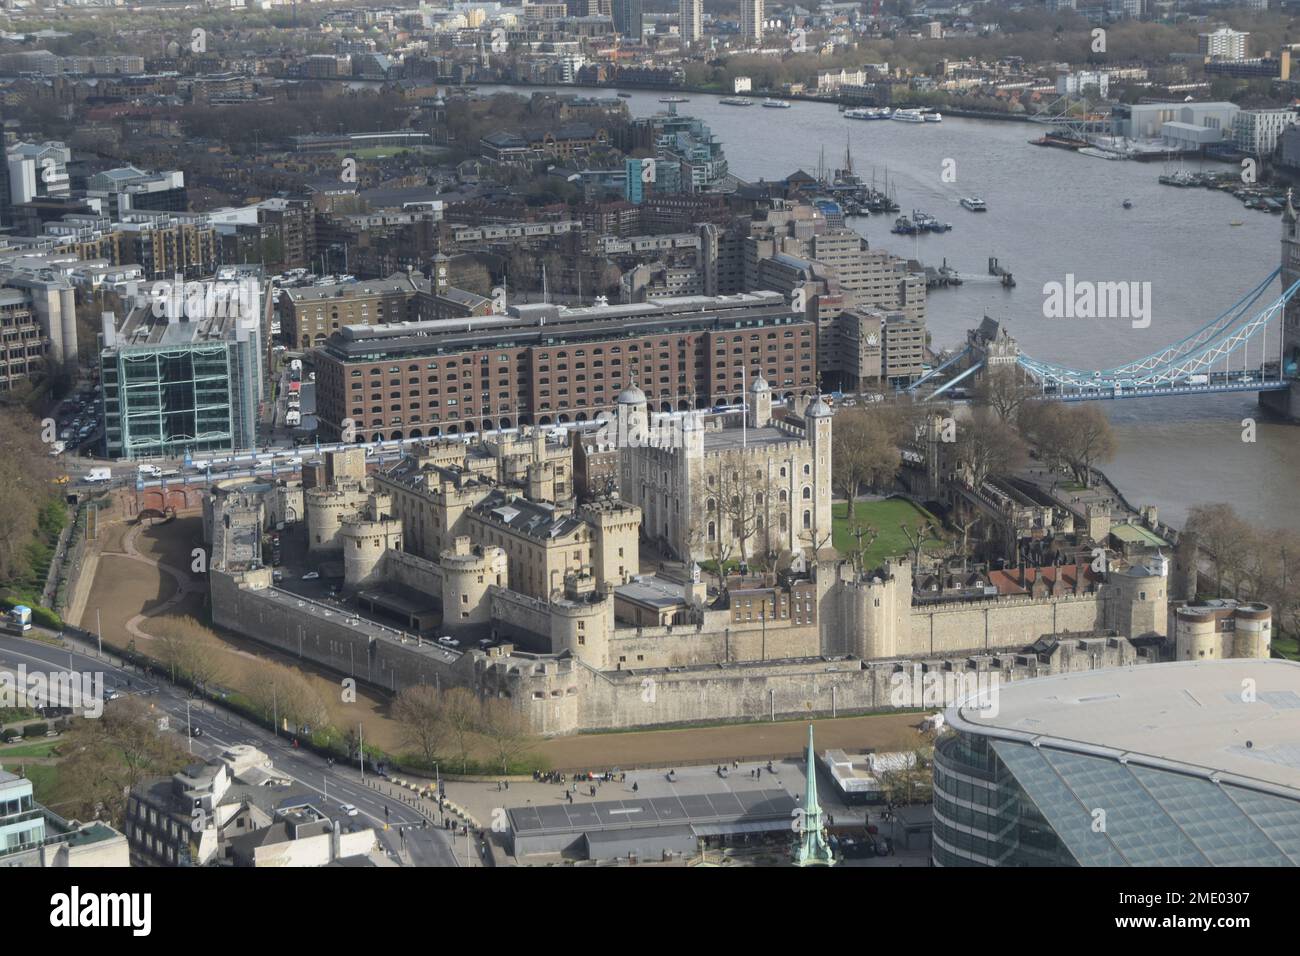 An aerial view of Tower of London Castle by River Thames in London, England Stock Photo